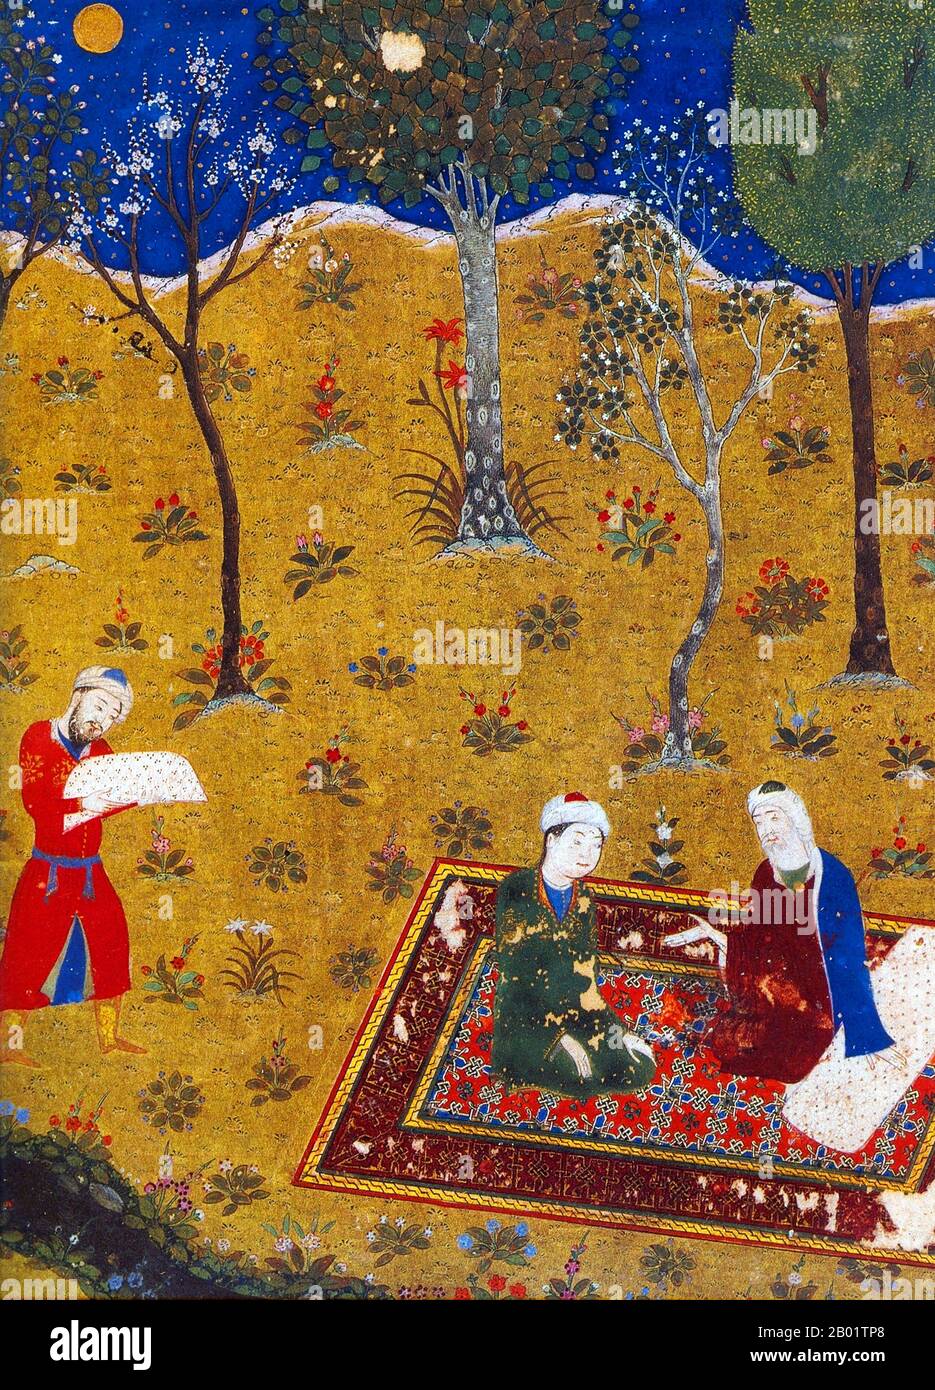 Iran/Persia: The poet Sa'di converses with a young man on a Persian carpet in a garden by night. Miniature painting from Gulistan Sa'di. Herat, 1427.  Abū-Muḥammad Muṣliḥ al-Dīn bin Abdallāh Shīrāzī, Saadi Shirazi, better known by his pen-name Saʿdī or, simply, Saadi, was one of the major Persian poets of the medieval period. He is not only famous in Persian-speaking countries, but he has also been quoted in western sources. He is recognised for the quality of his writings, and for the depth of his social and moral thoughts. Stock Photo